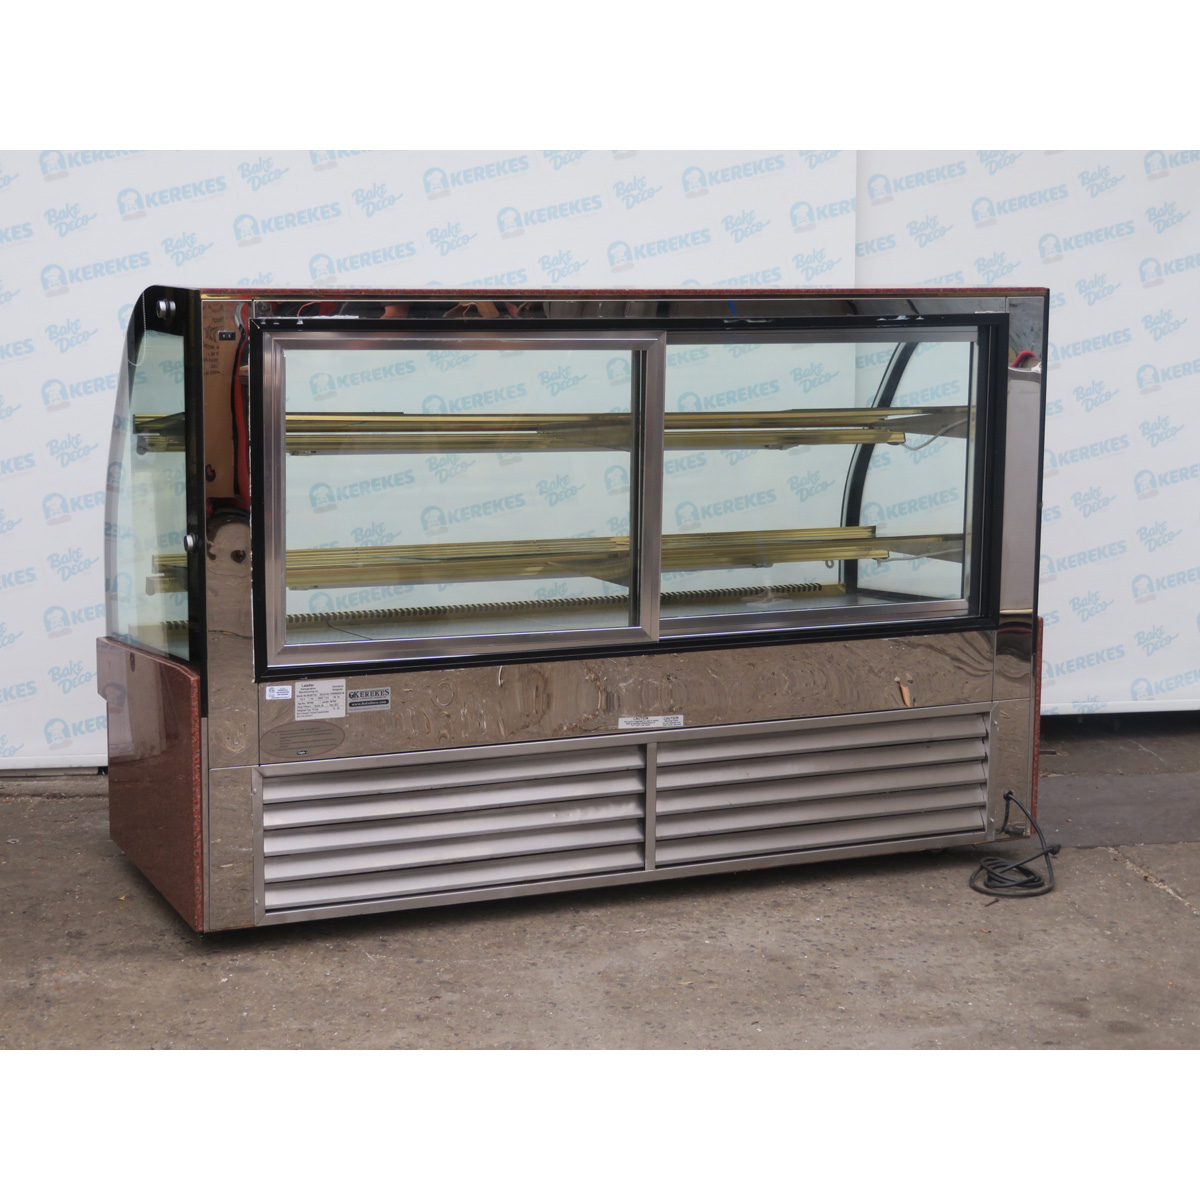 Leader MCB77SC Refrigerated Bakery Display Case, Used Great Condition image 2